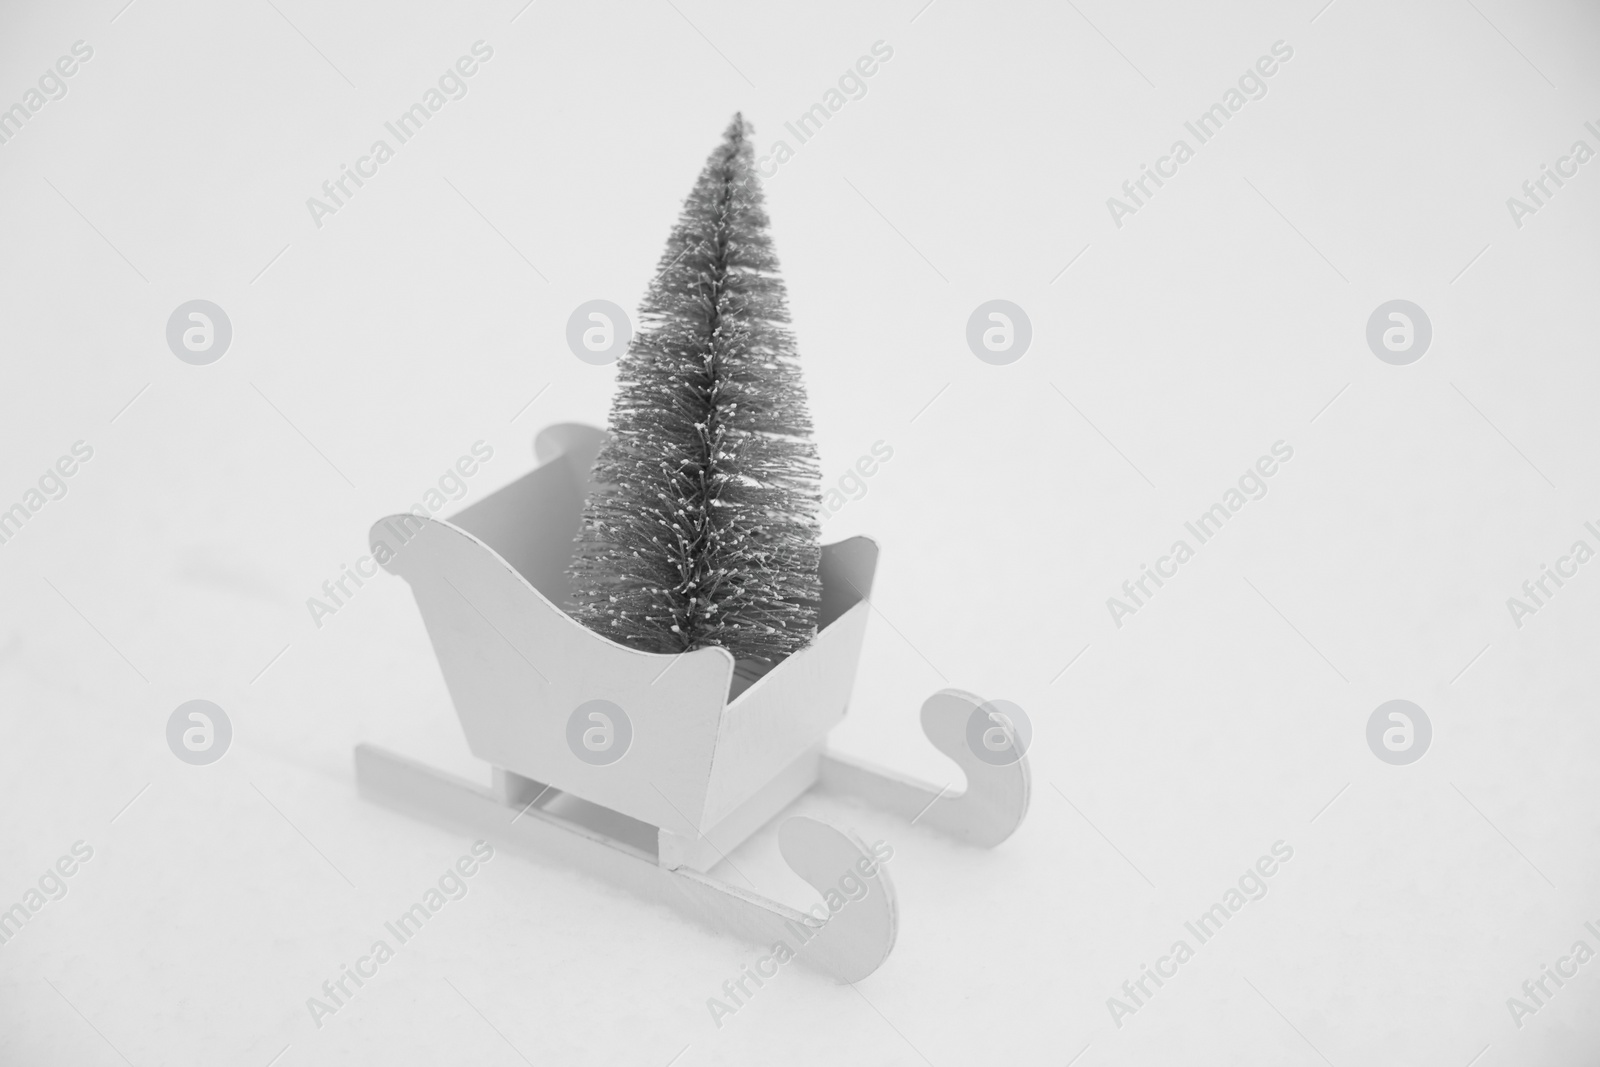 Photo of White wooden sleigh with decorative fir tree on snow outdoors